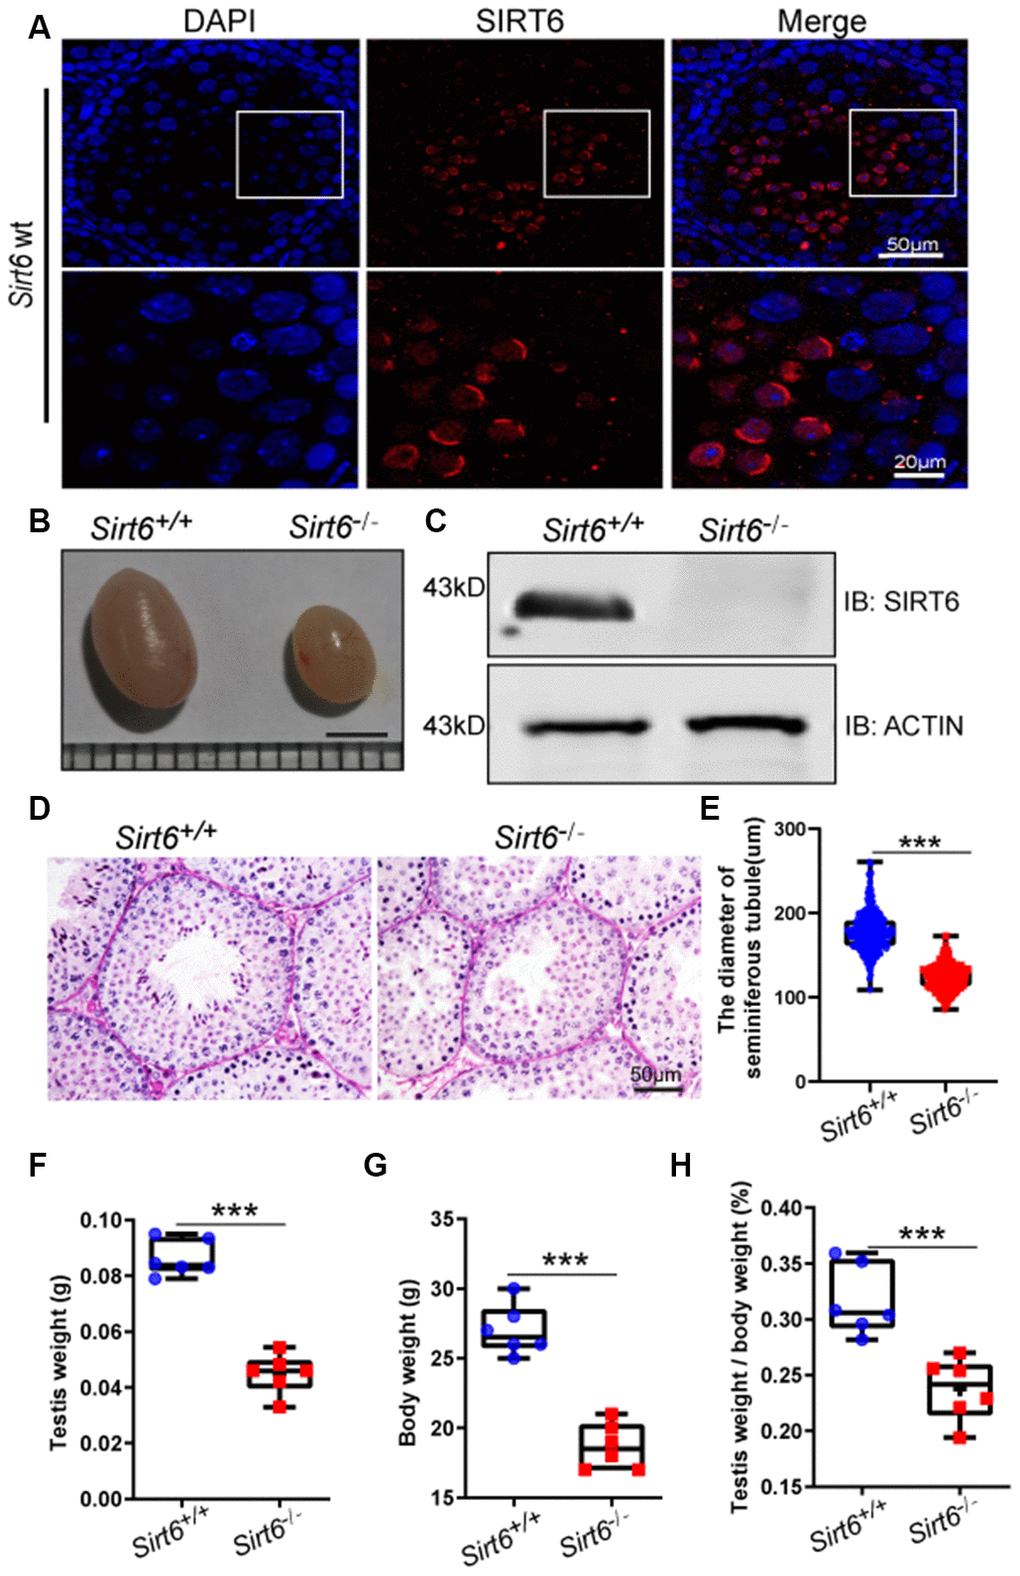 SIRT6 protein expression and localization in mice testes. (A) Testicular sections of Sirt6+/+ stained for SIRT6 (red) and DAPI (blue). SIRT6 is localized in the spermatids. 8-week mice, n=3. (B) The testes of Sirt6-/- mice were smaller than those of the Sirt6+/+ mice. 8-week mice, n=6, scale bar=3 mm. (C) SIRT6 protein levels were dramatically reduced in the testes of the Sirt6-/- mice. ACTIN was used as the loading control. 8-week mice, n=3. (D) Histological analysis of Sirt6+/+ and Sirt6-/- mice seminiferous tubules by PAS-hematoxylin staining. 8-week mice, n=4. (E) The diameter of the seminiferous tubules in Sirt6-/- mice was smaller than that in control mice. Sirt6+/+, 177.43±2.36μm; Sirt6-/-, 123.94±1.92μm. 8-week mice, n=6; 300 seminiferous tubules were used for each group. Data are presented as mean ± SEM. ***P F) Quantification of testis weight of the Sirt6+/+ and Sirt6-/- mice. The testis weight of Sirt6-/- mice was significantly reduced. Sirt6+/+, 8.60±1.30% g; Sirt6-/-, 4.49±1.40% g. 8-week mice, n=6. Data are presented as mean ± SEM. ***P G) Quantification of body weight of the Sirt6+/+ and Sirt6-/- mice. The body weight of Sirt6-/- mice was reduced. Sirt6+/+, 27.00±0.55 g; Sirt6-/-, 18.67±0.30g. 8-week mice, n=6. Data are presented as mean ± SEM. ***P H) The testis weight/ body weight of Sirt6-/- mice was also reduced. Sirt6+/+, 0.32±0.07%; Sirt6-/-, 0.04±0.07%. 8-week mice, n=6. Data are presented as mean ± SEM. ***P 